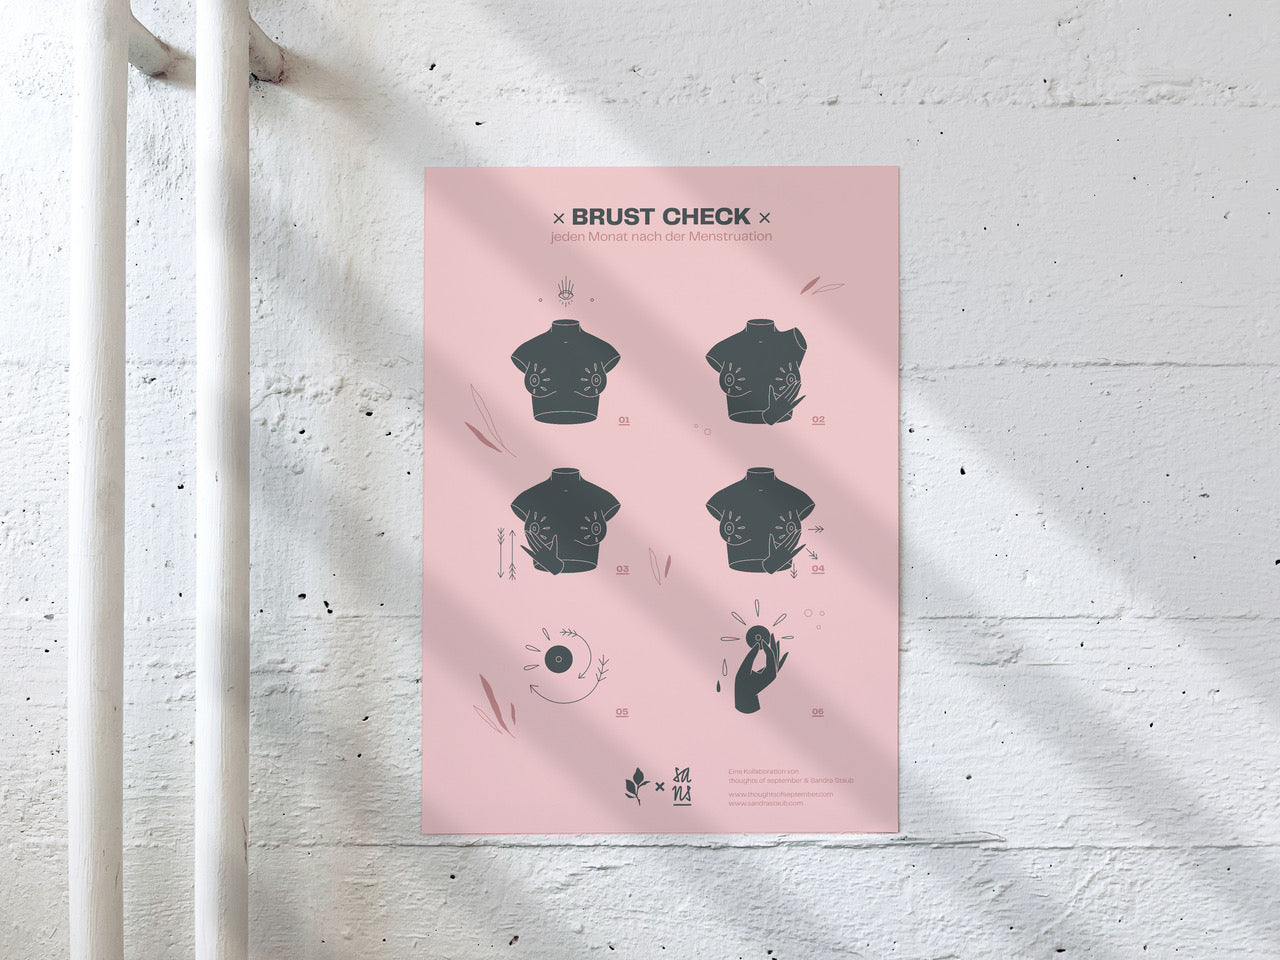 Wall with breast check poster with illustrations from Sandra Staub.